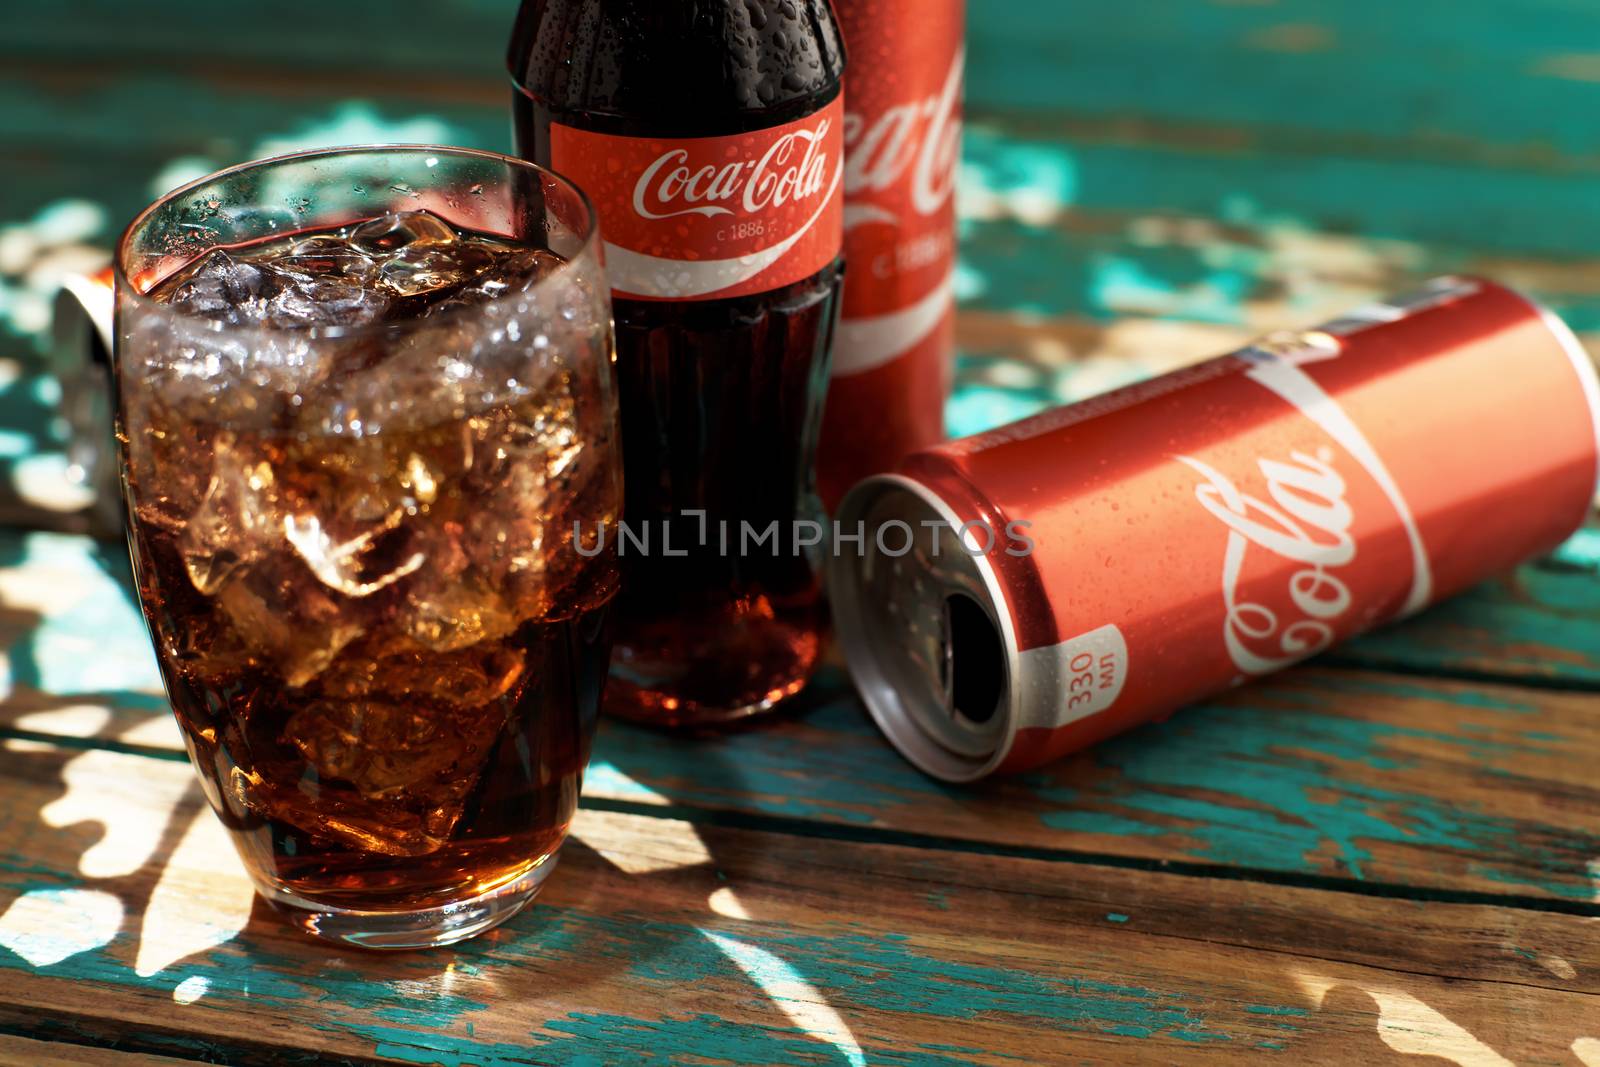 Coca-Cola is a carbonated soft drink popular all over the world. She is sold in restaurants, stores, everywhere.